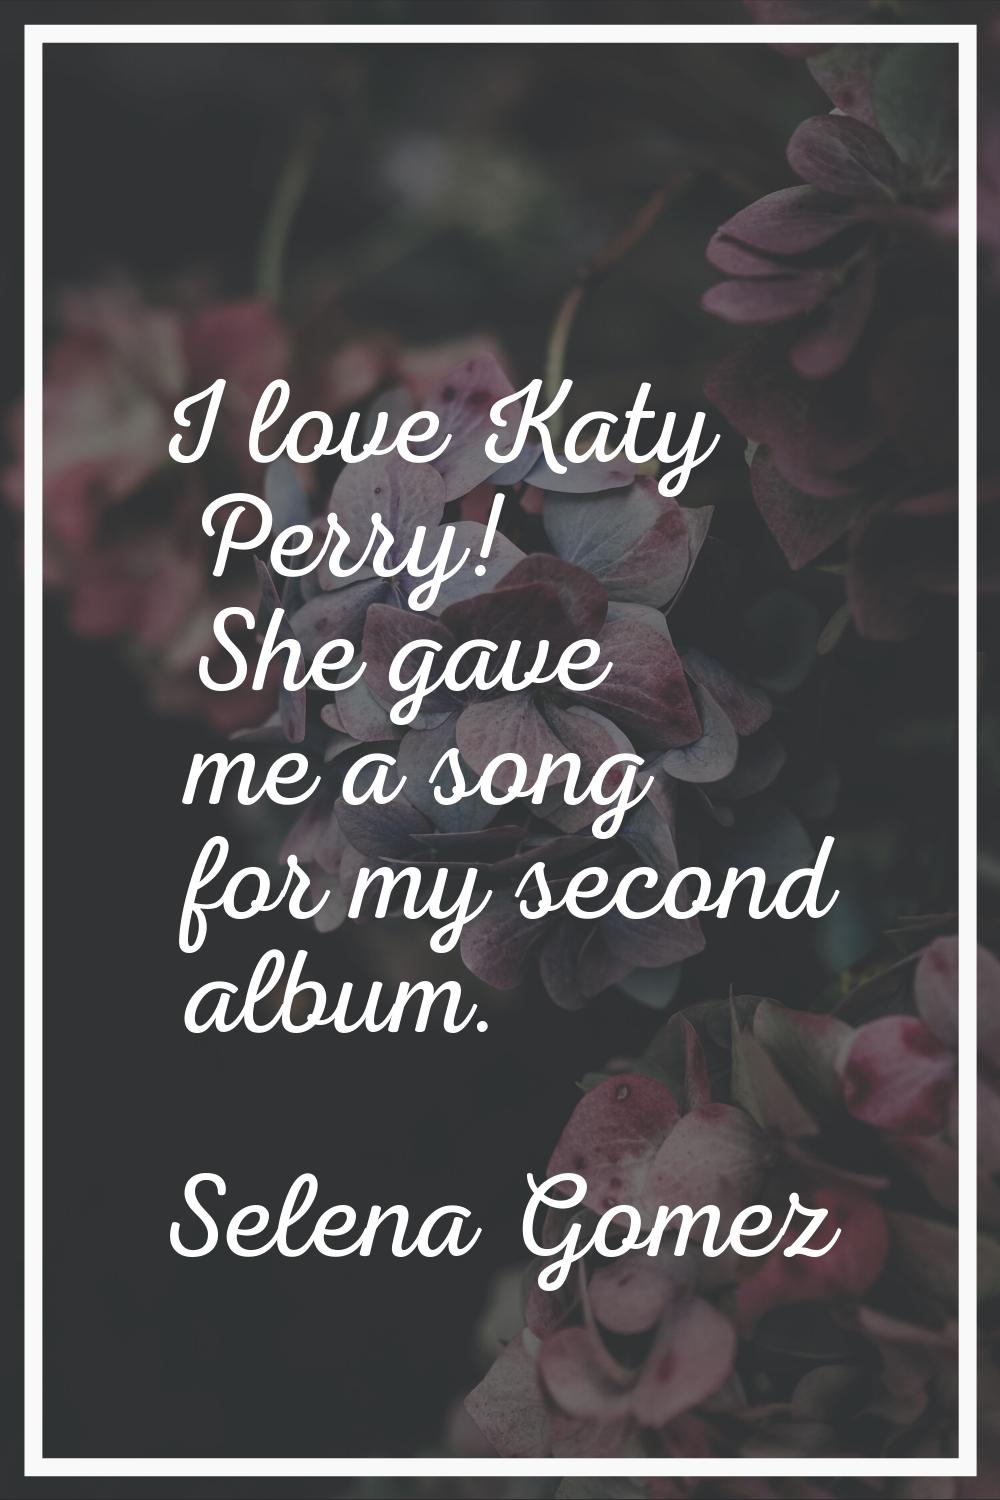 I love Katy Perry! She gave me a song for my second album.